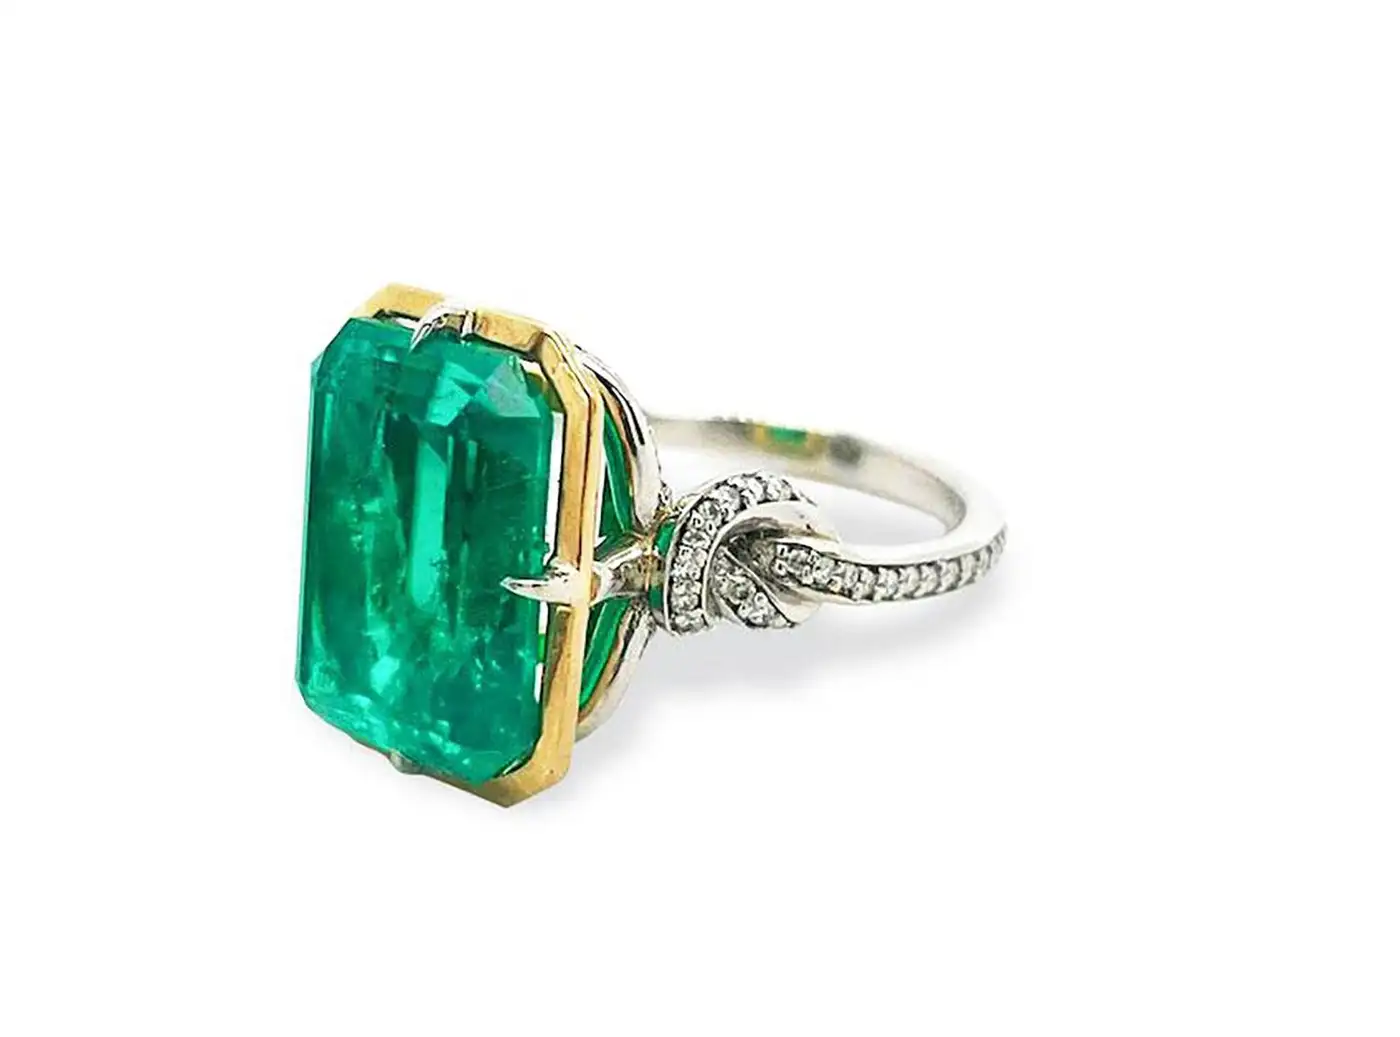 3ct Emerald in Forget Me Knot Ring Pla